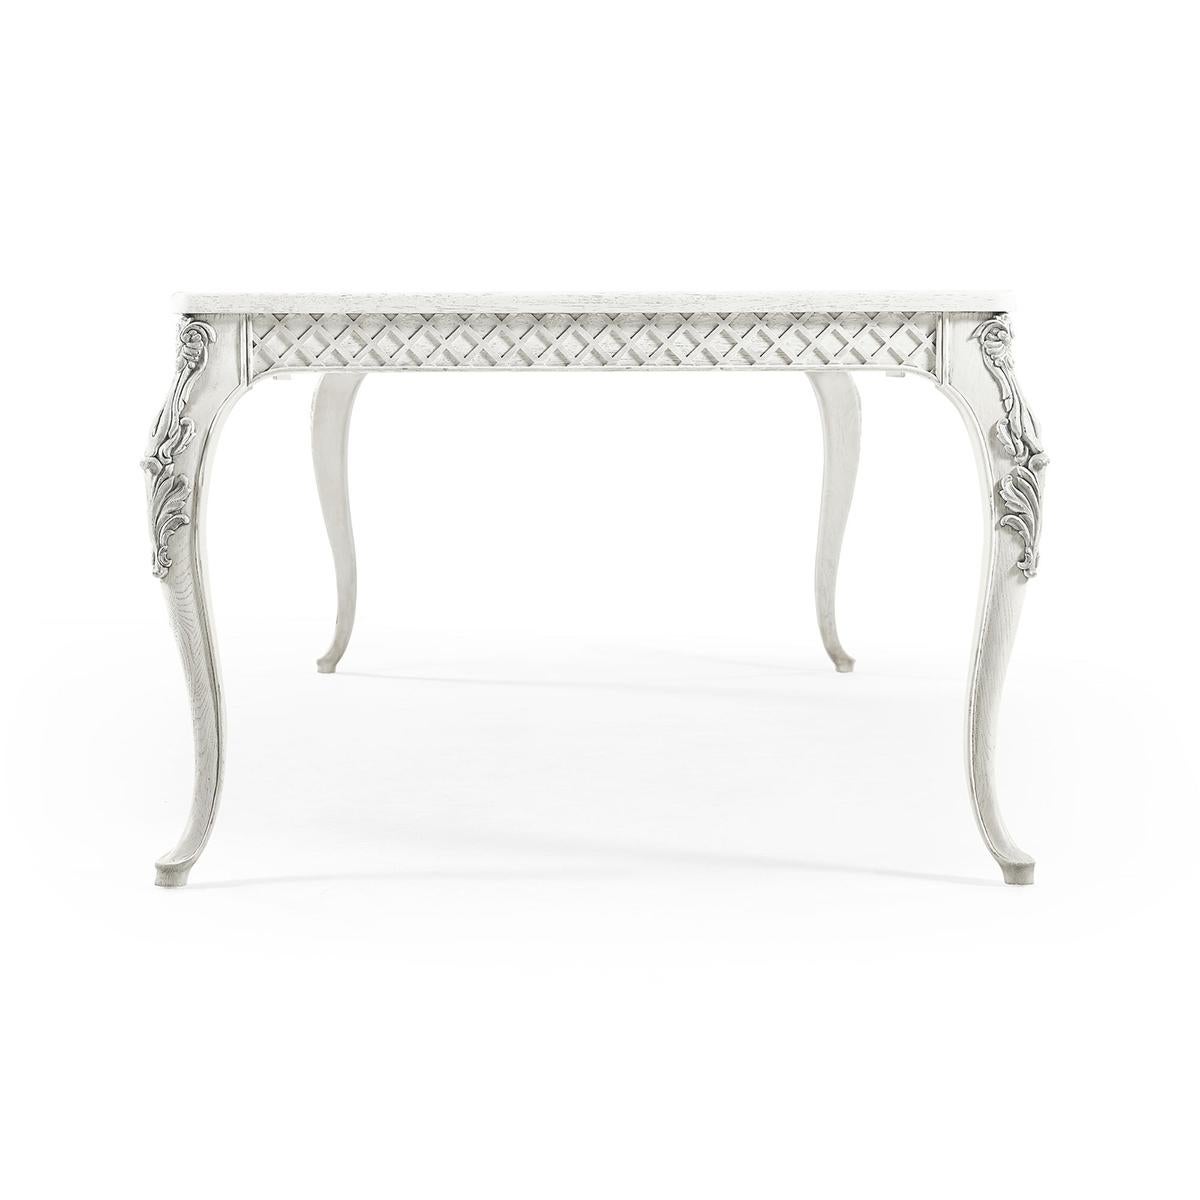 Vietnamese French Provincial White Dining Table For Sale